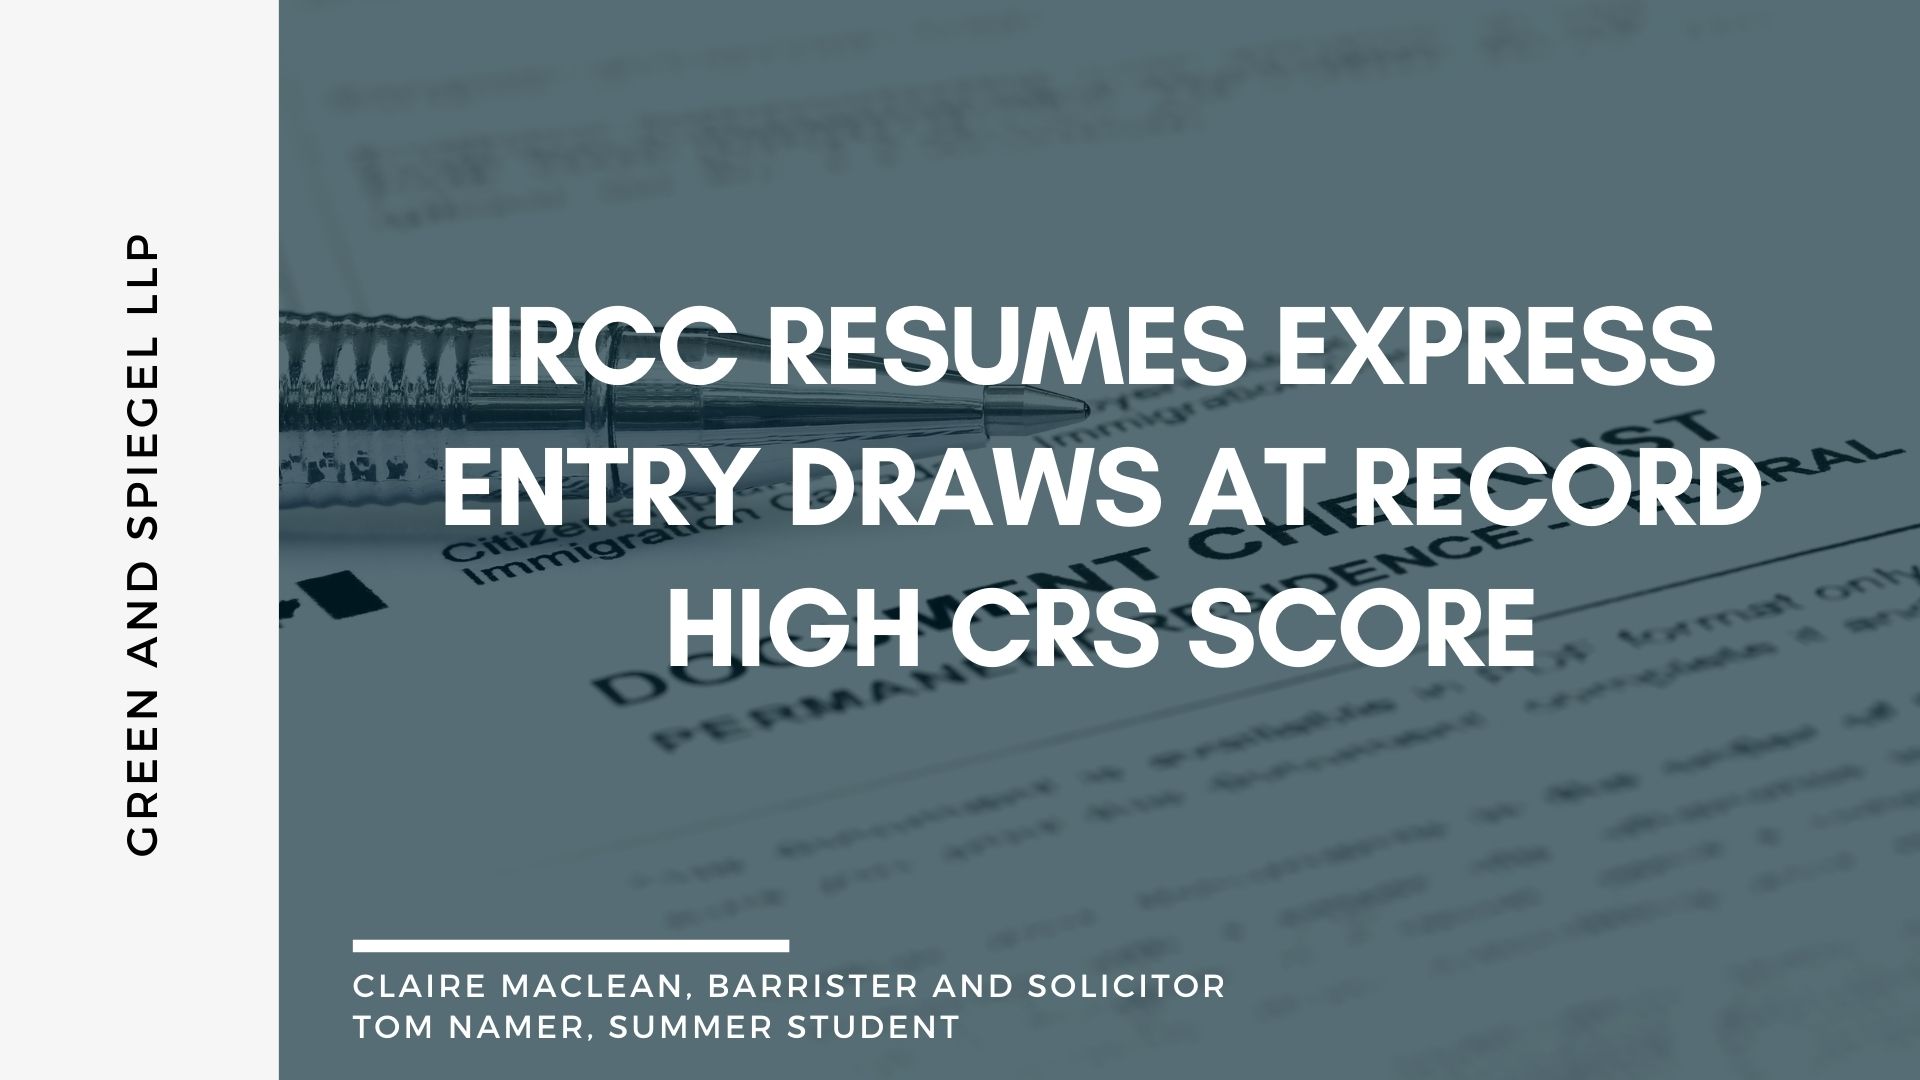 IRCC Resumes Express Entry Draws at Record High CRS Score